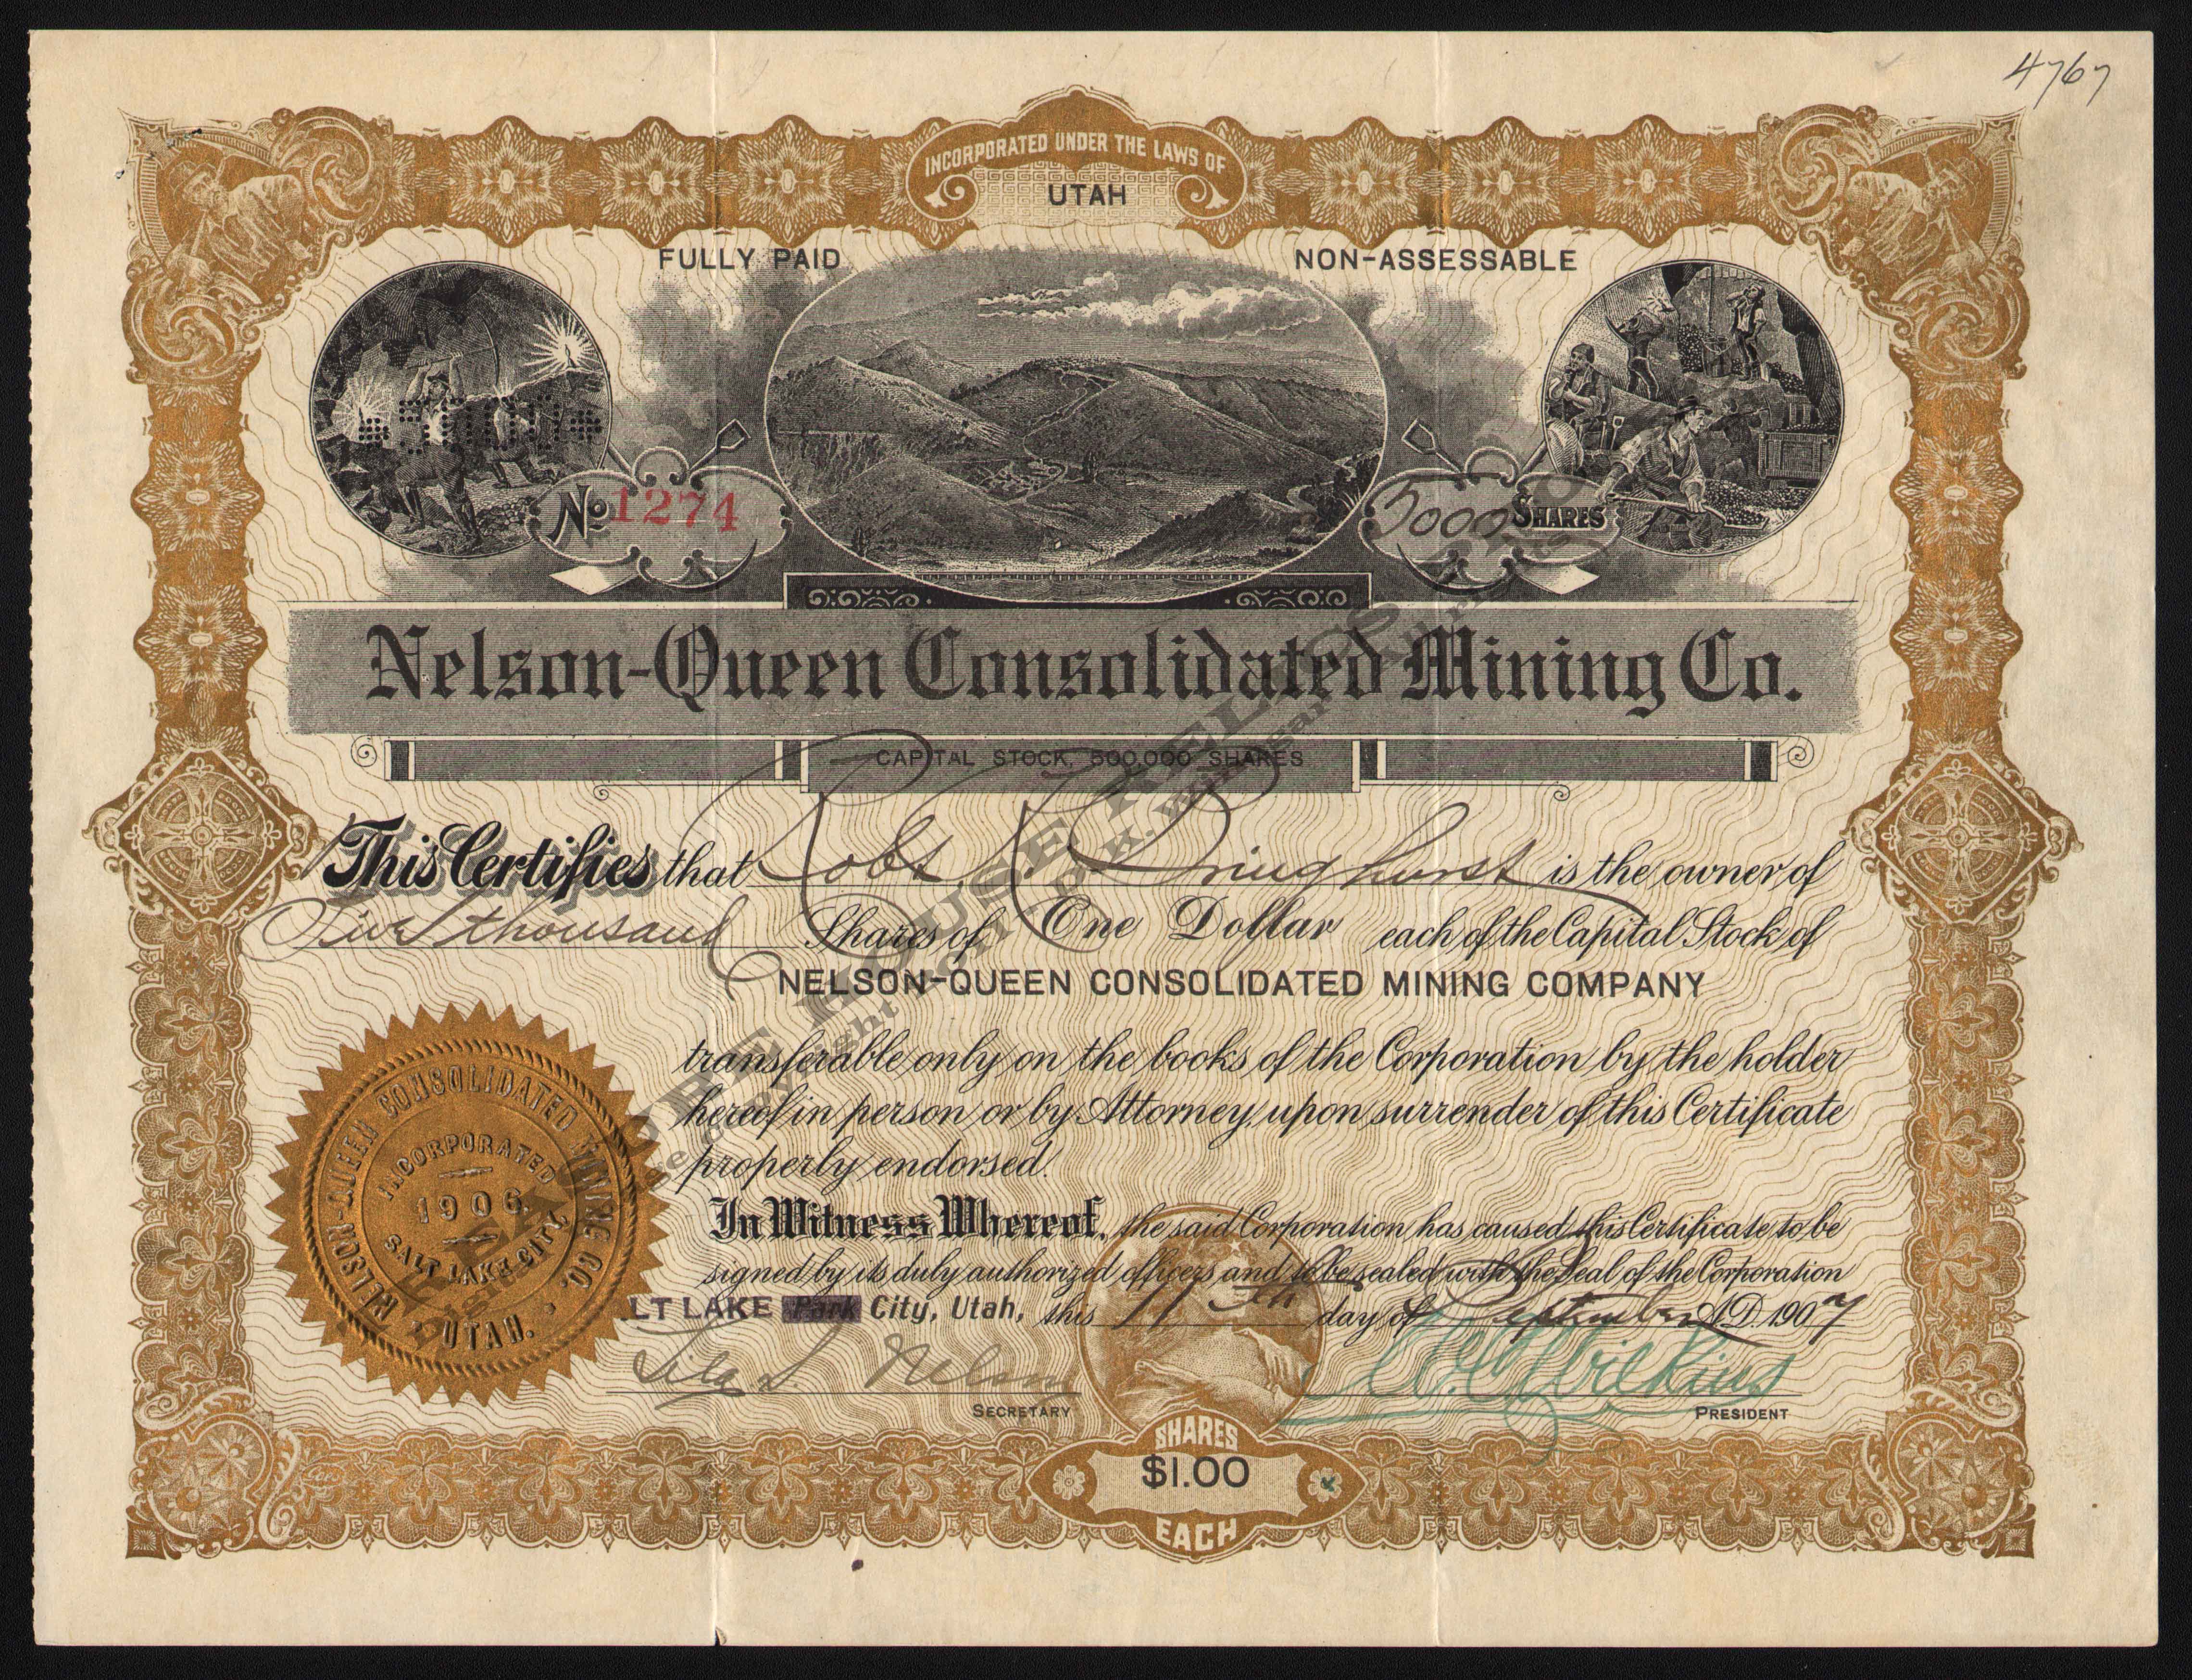 LETTERHEAD/NELSON_QUEEN_CONSOLIDATED_MINING_COMPANY_1274_1907_KIRK_400_CROP_EMBOSS.jpg